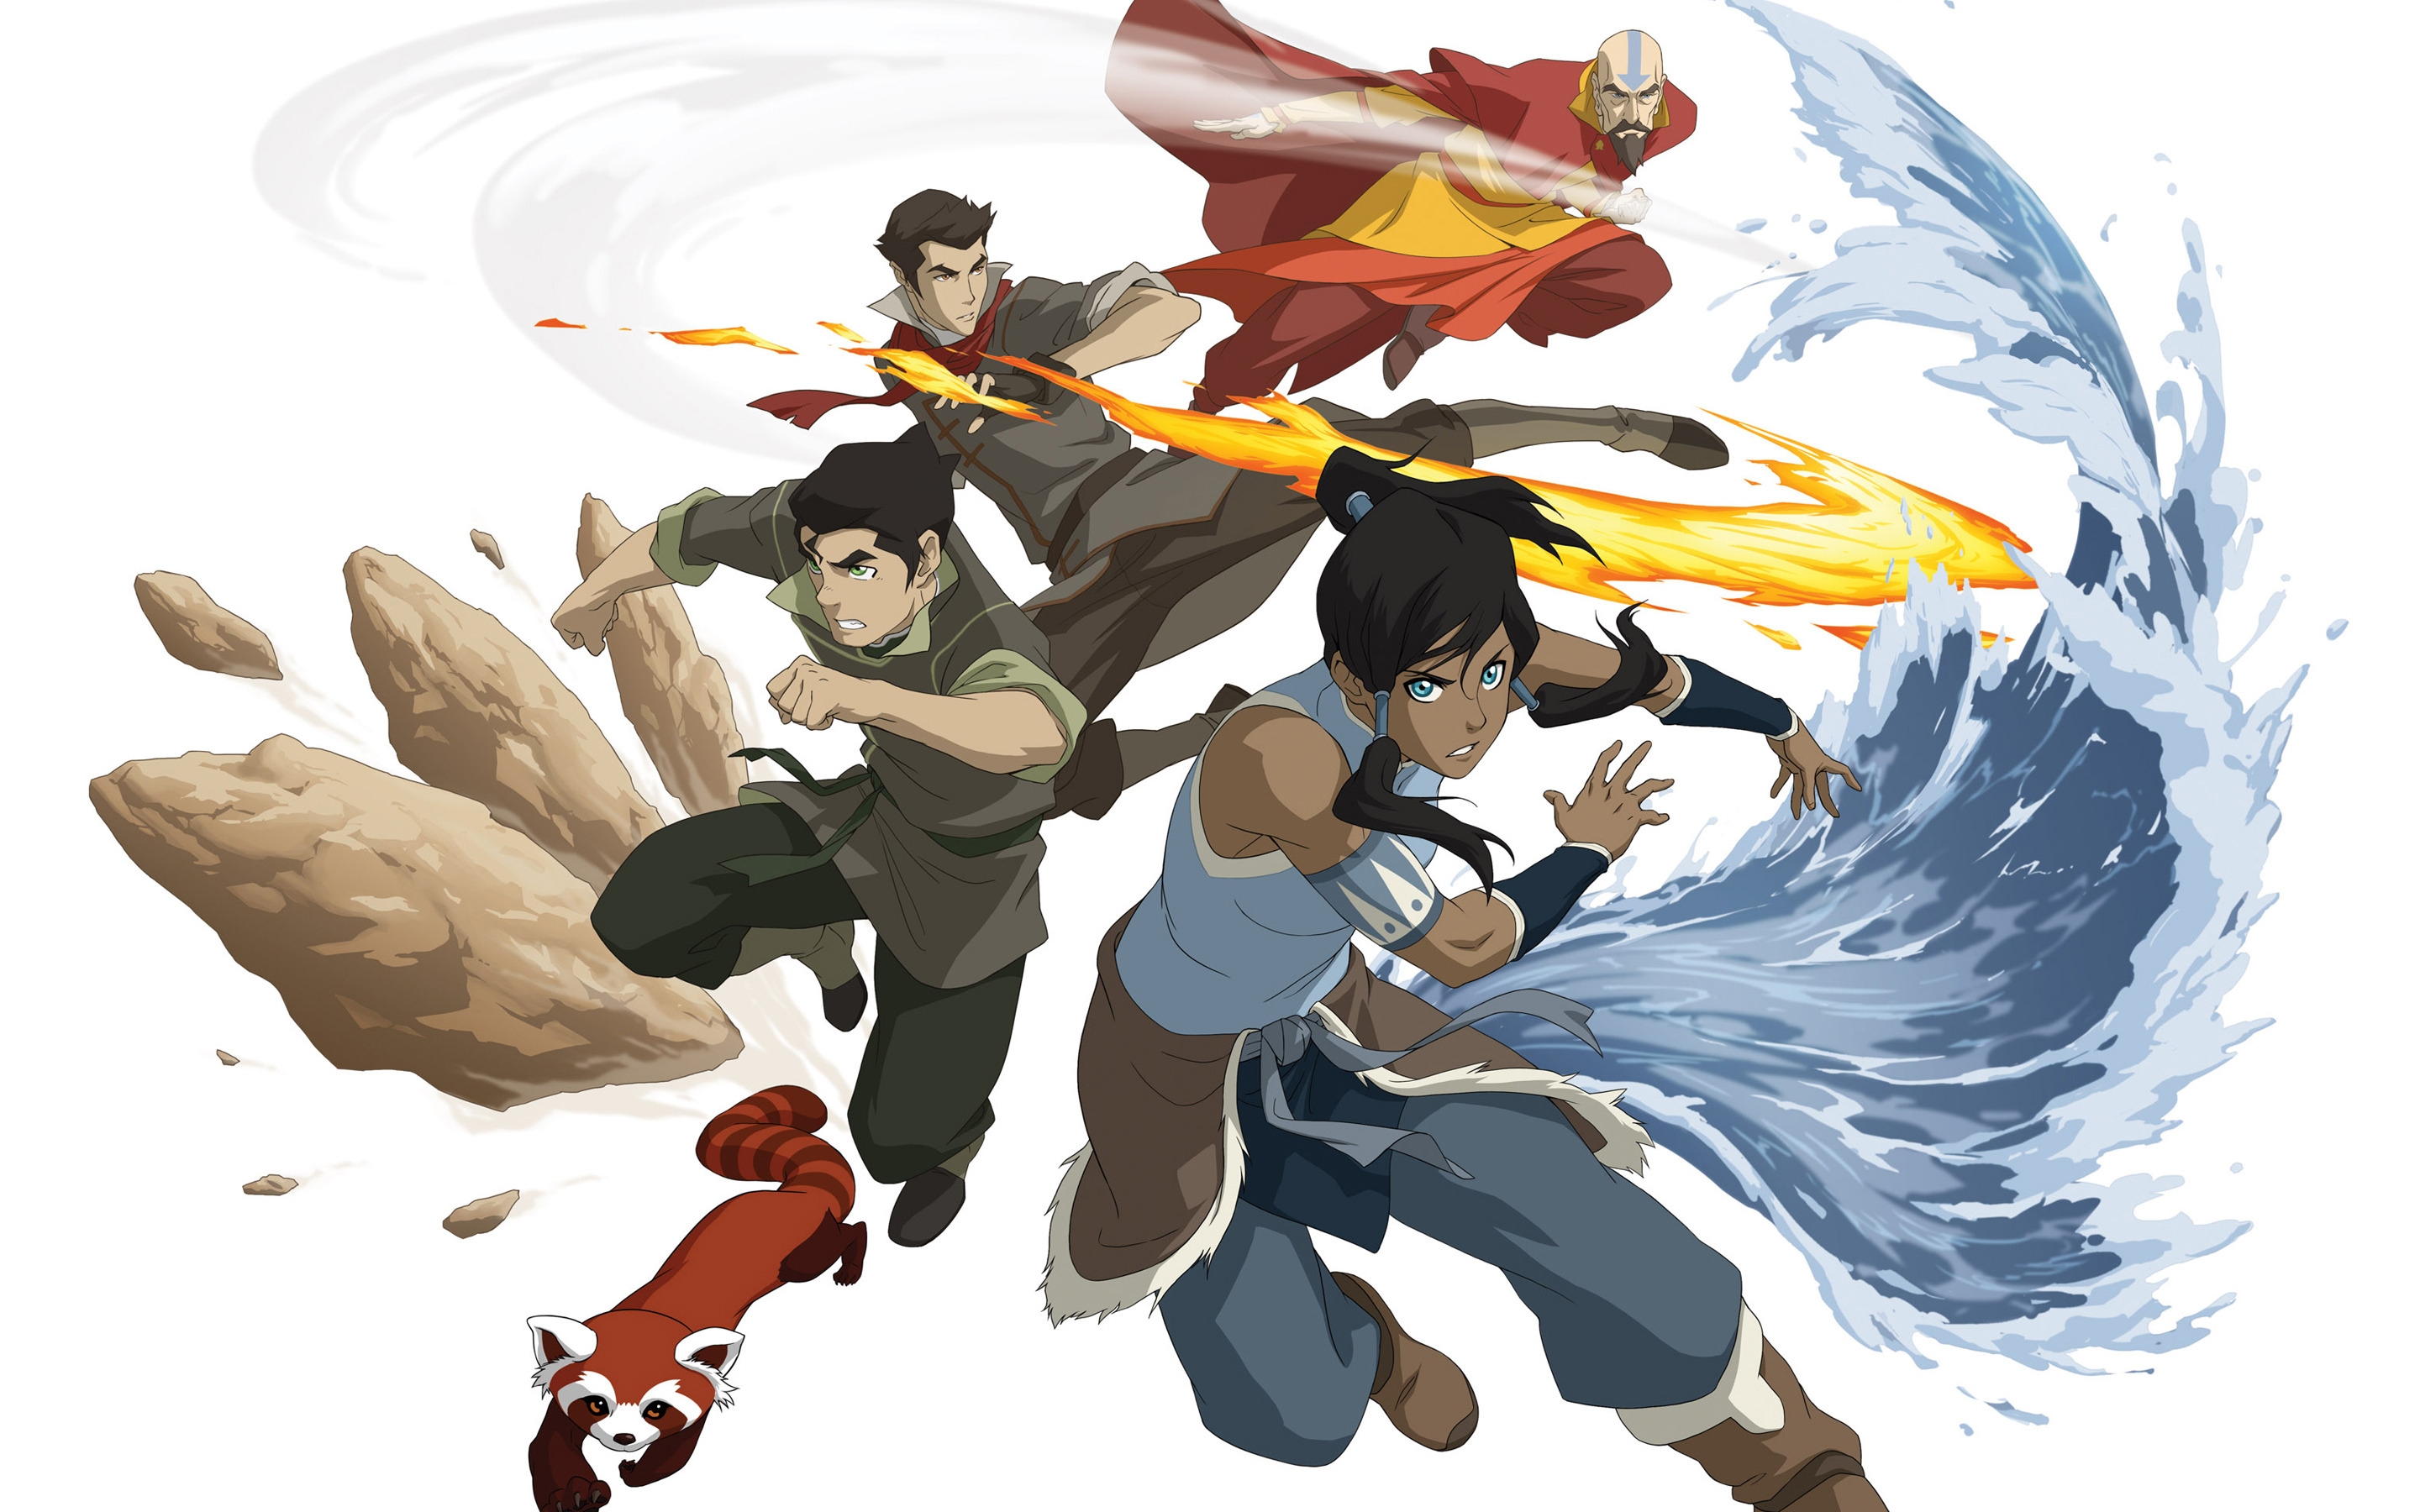 The Legend of Korra Animated for 2880 x 1800 Retina Display resolution